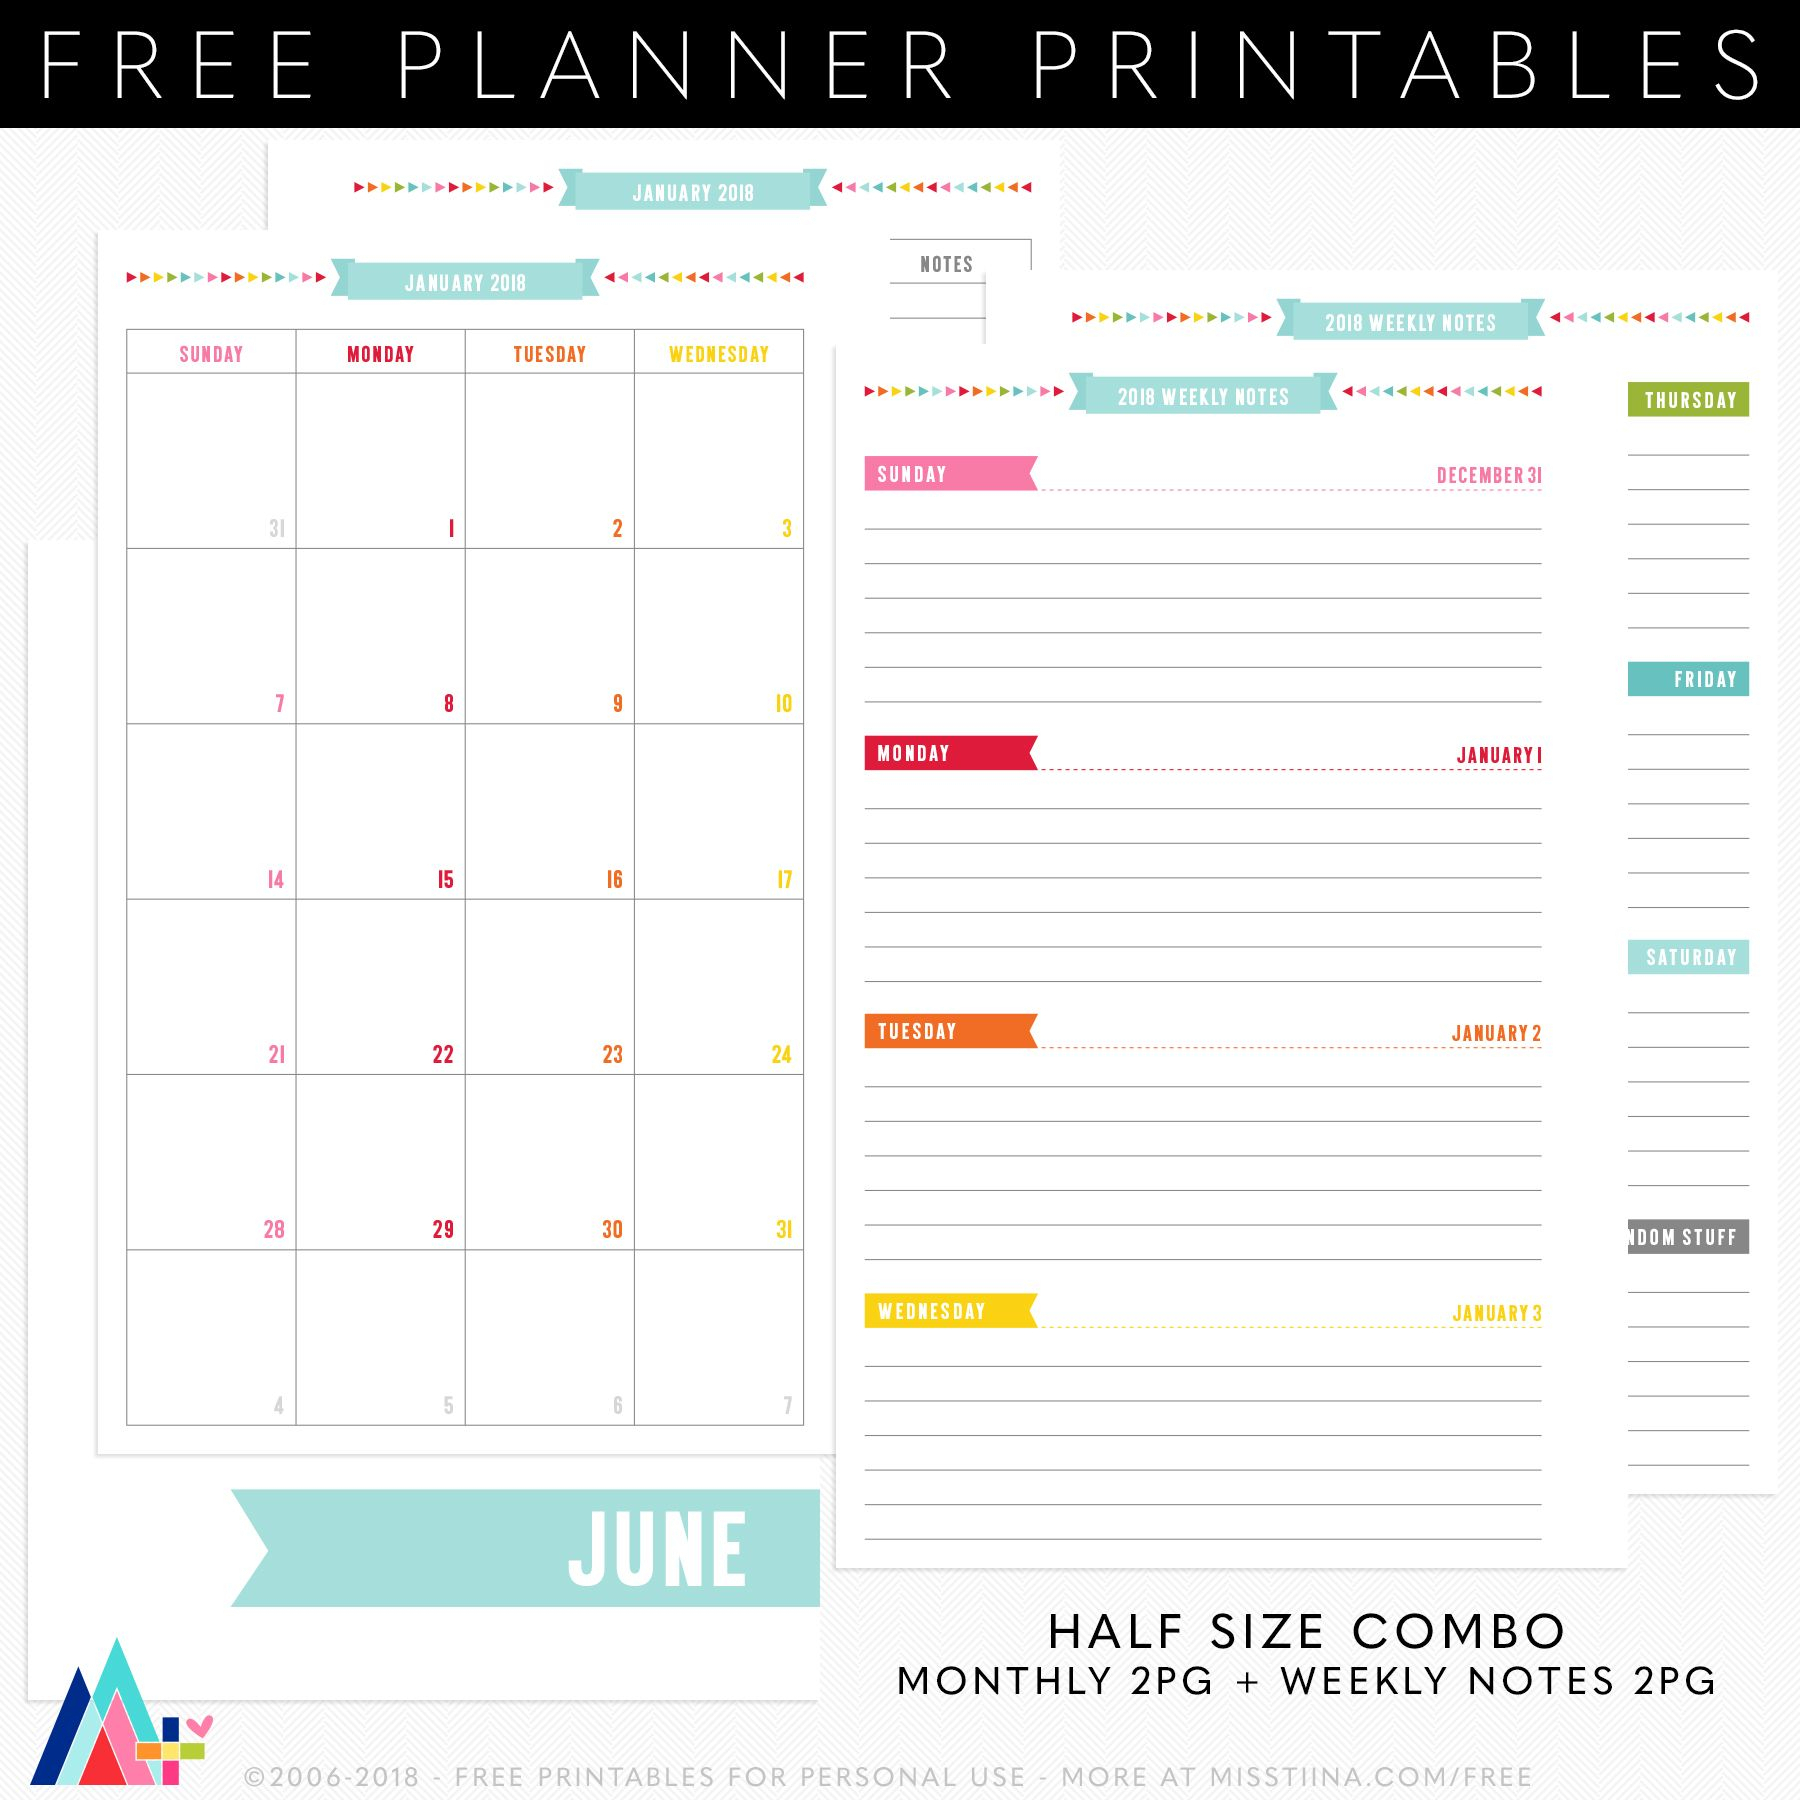 Get Full Size Printable Monthly Calendars